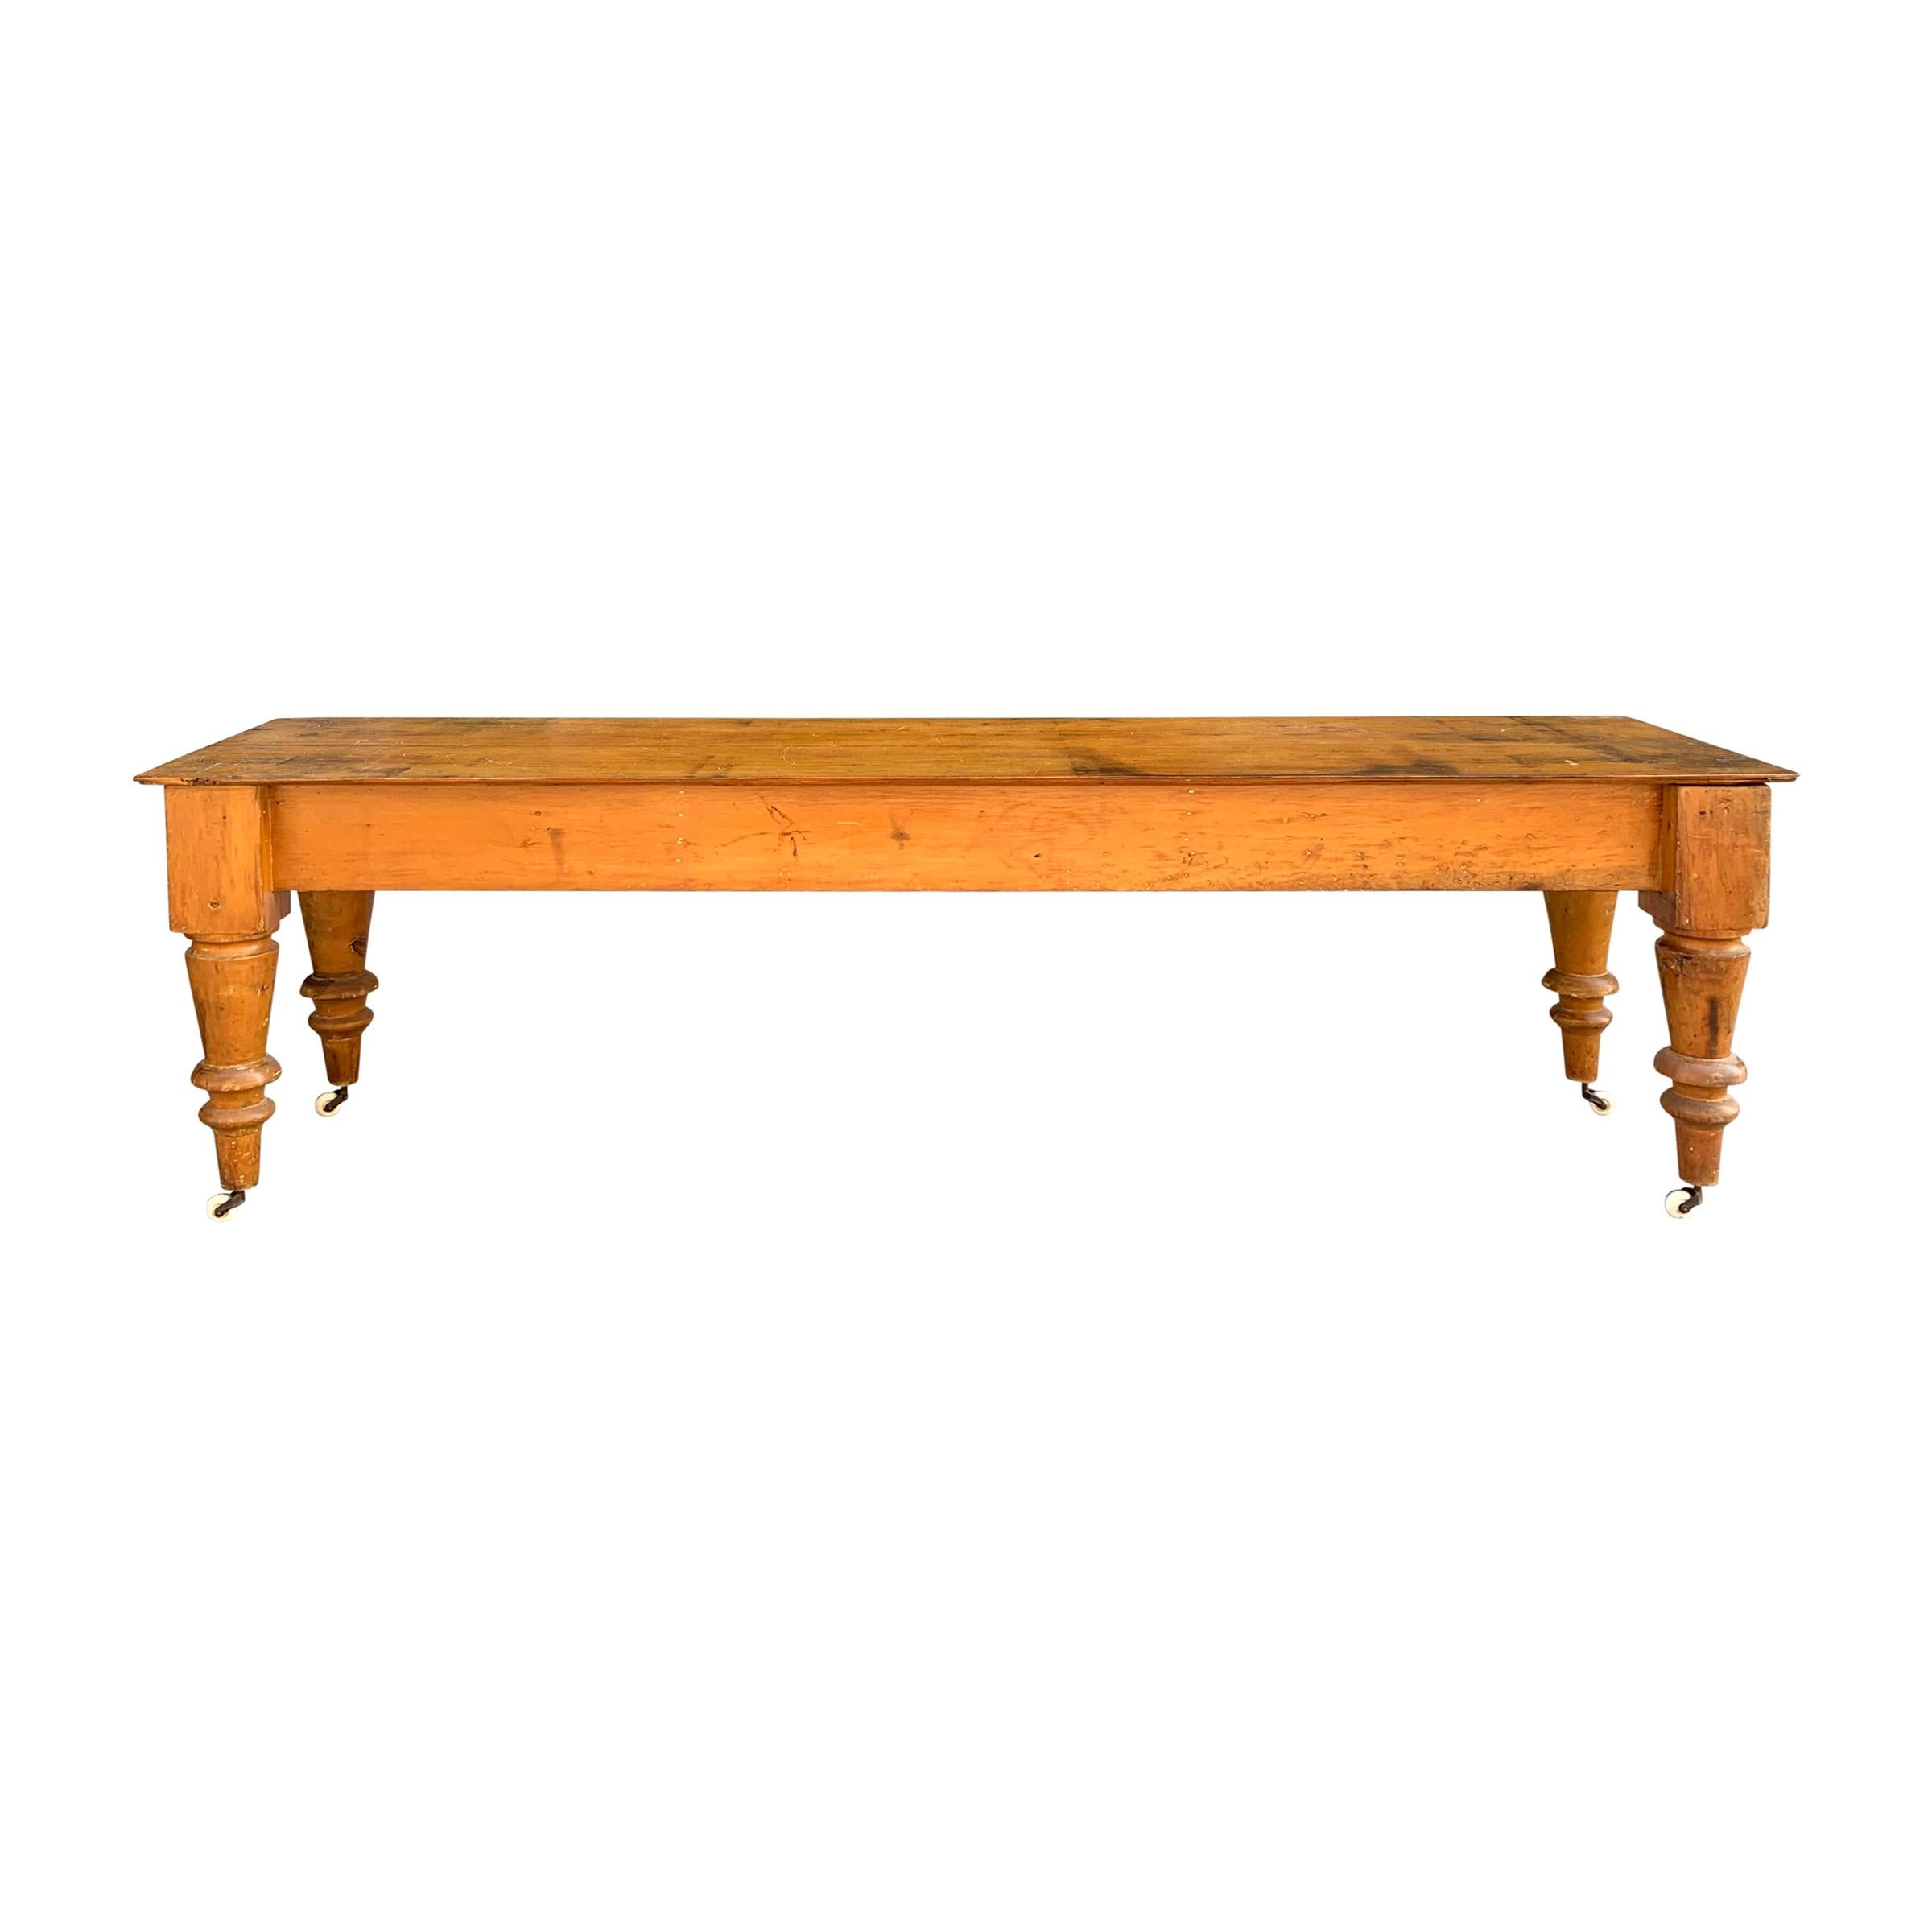 19th Century American Harvest Table with Turned Legs